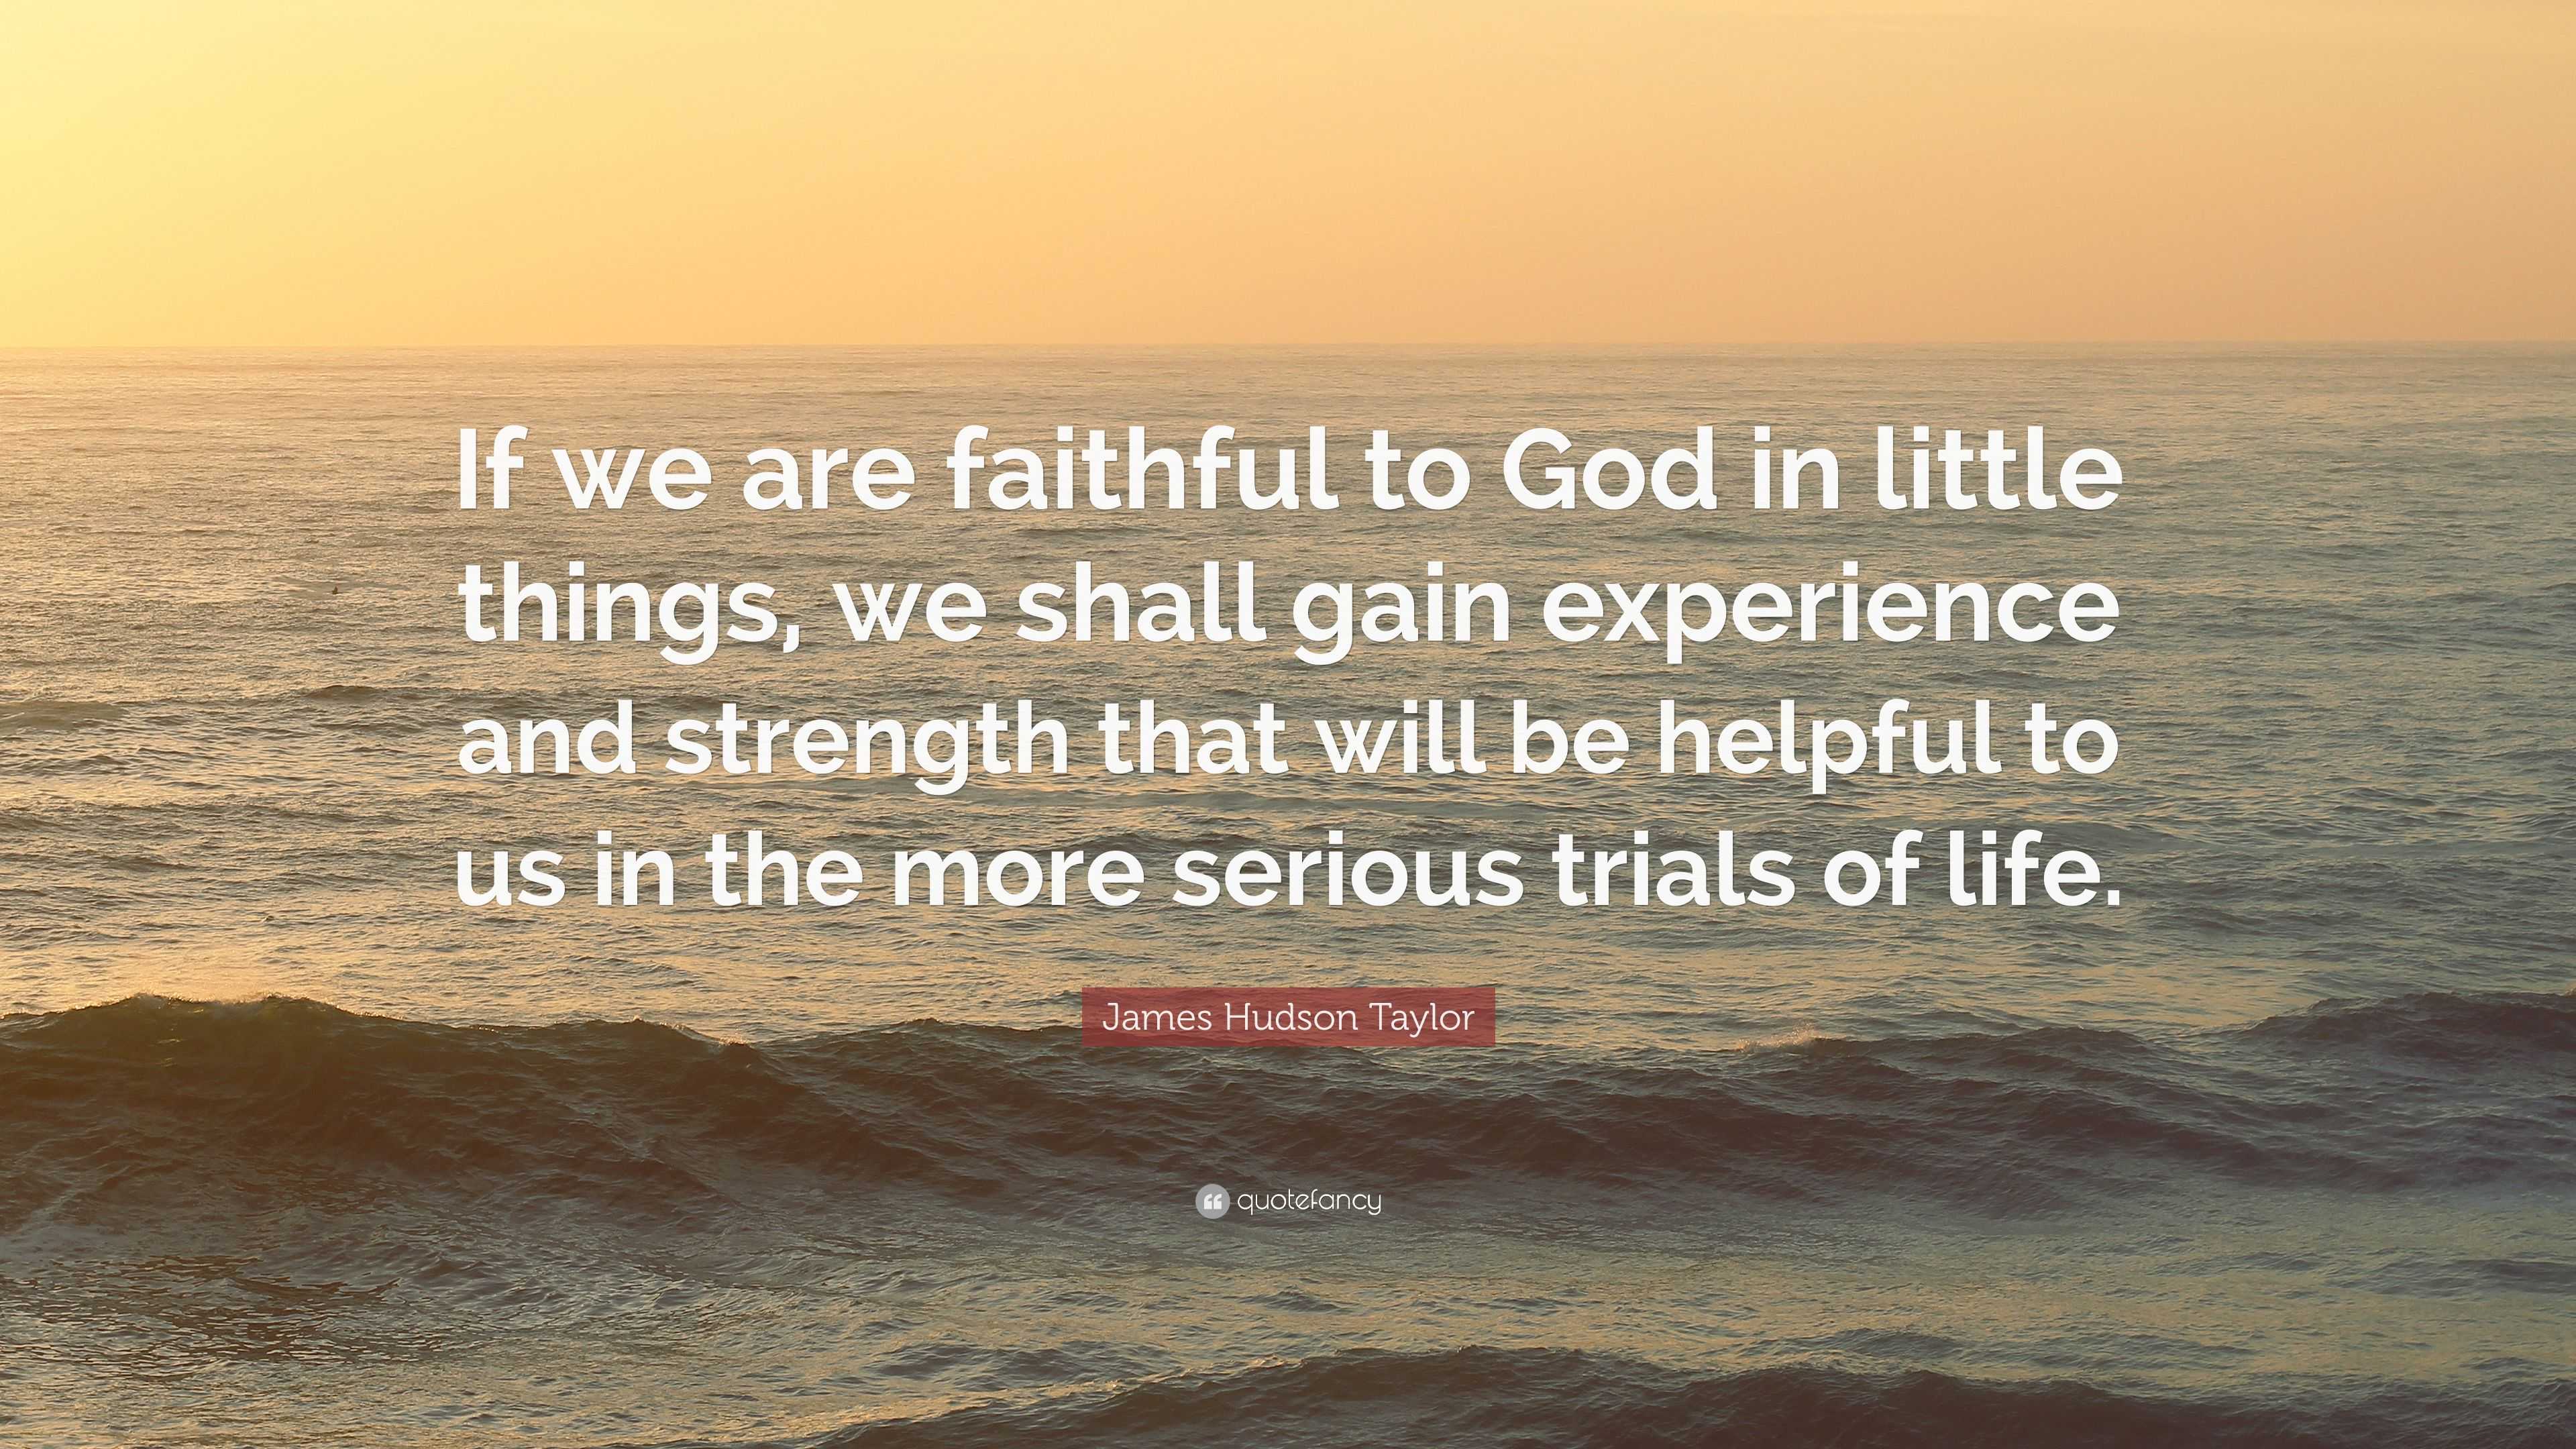 James Hudson Taylor Quote “If we are faithful to God in little things